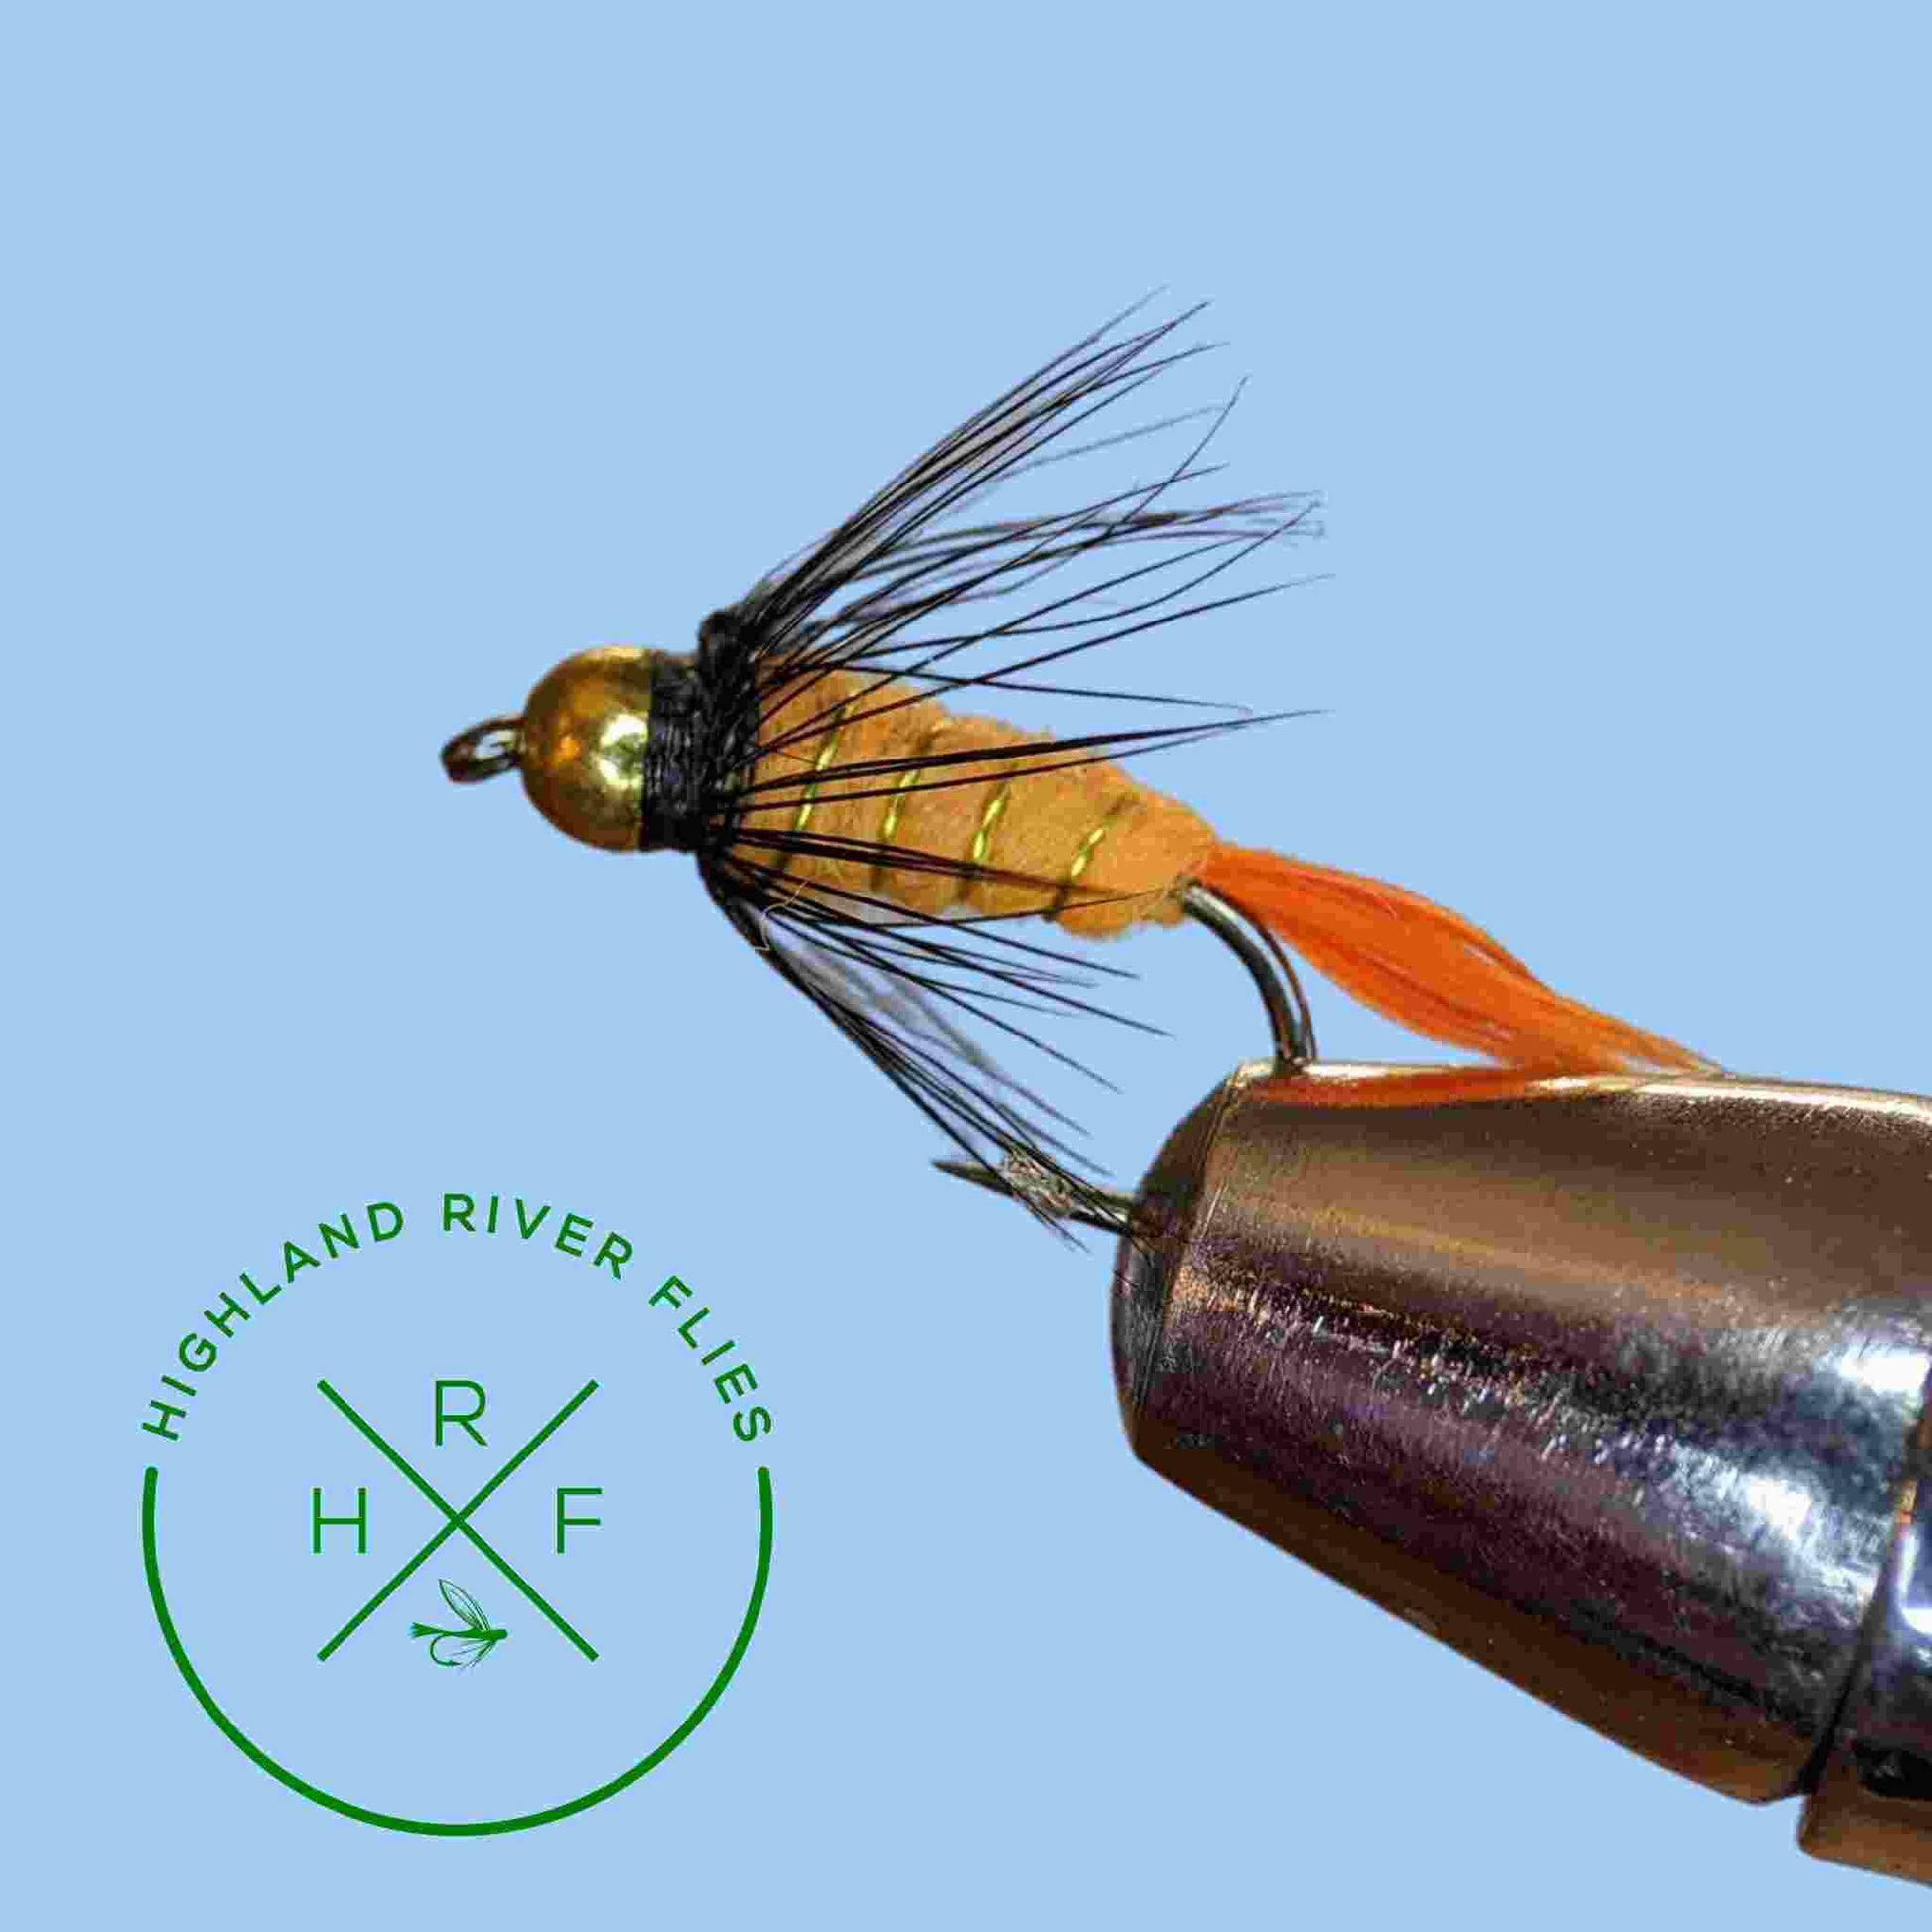 Greasy Scotian wet fly